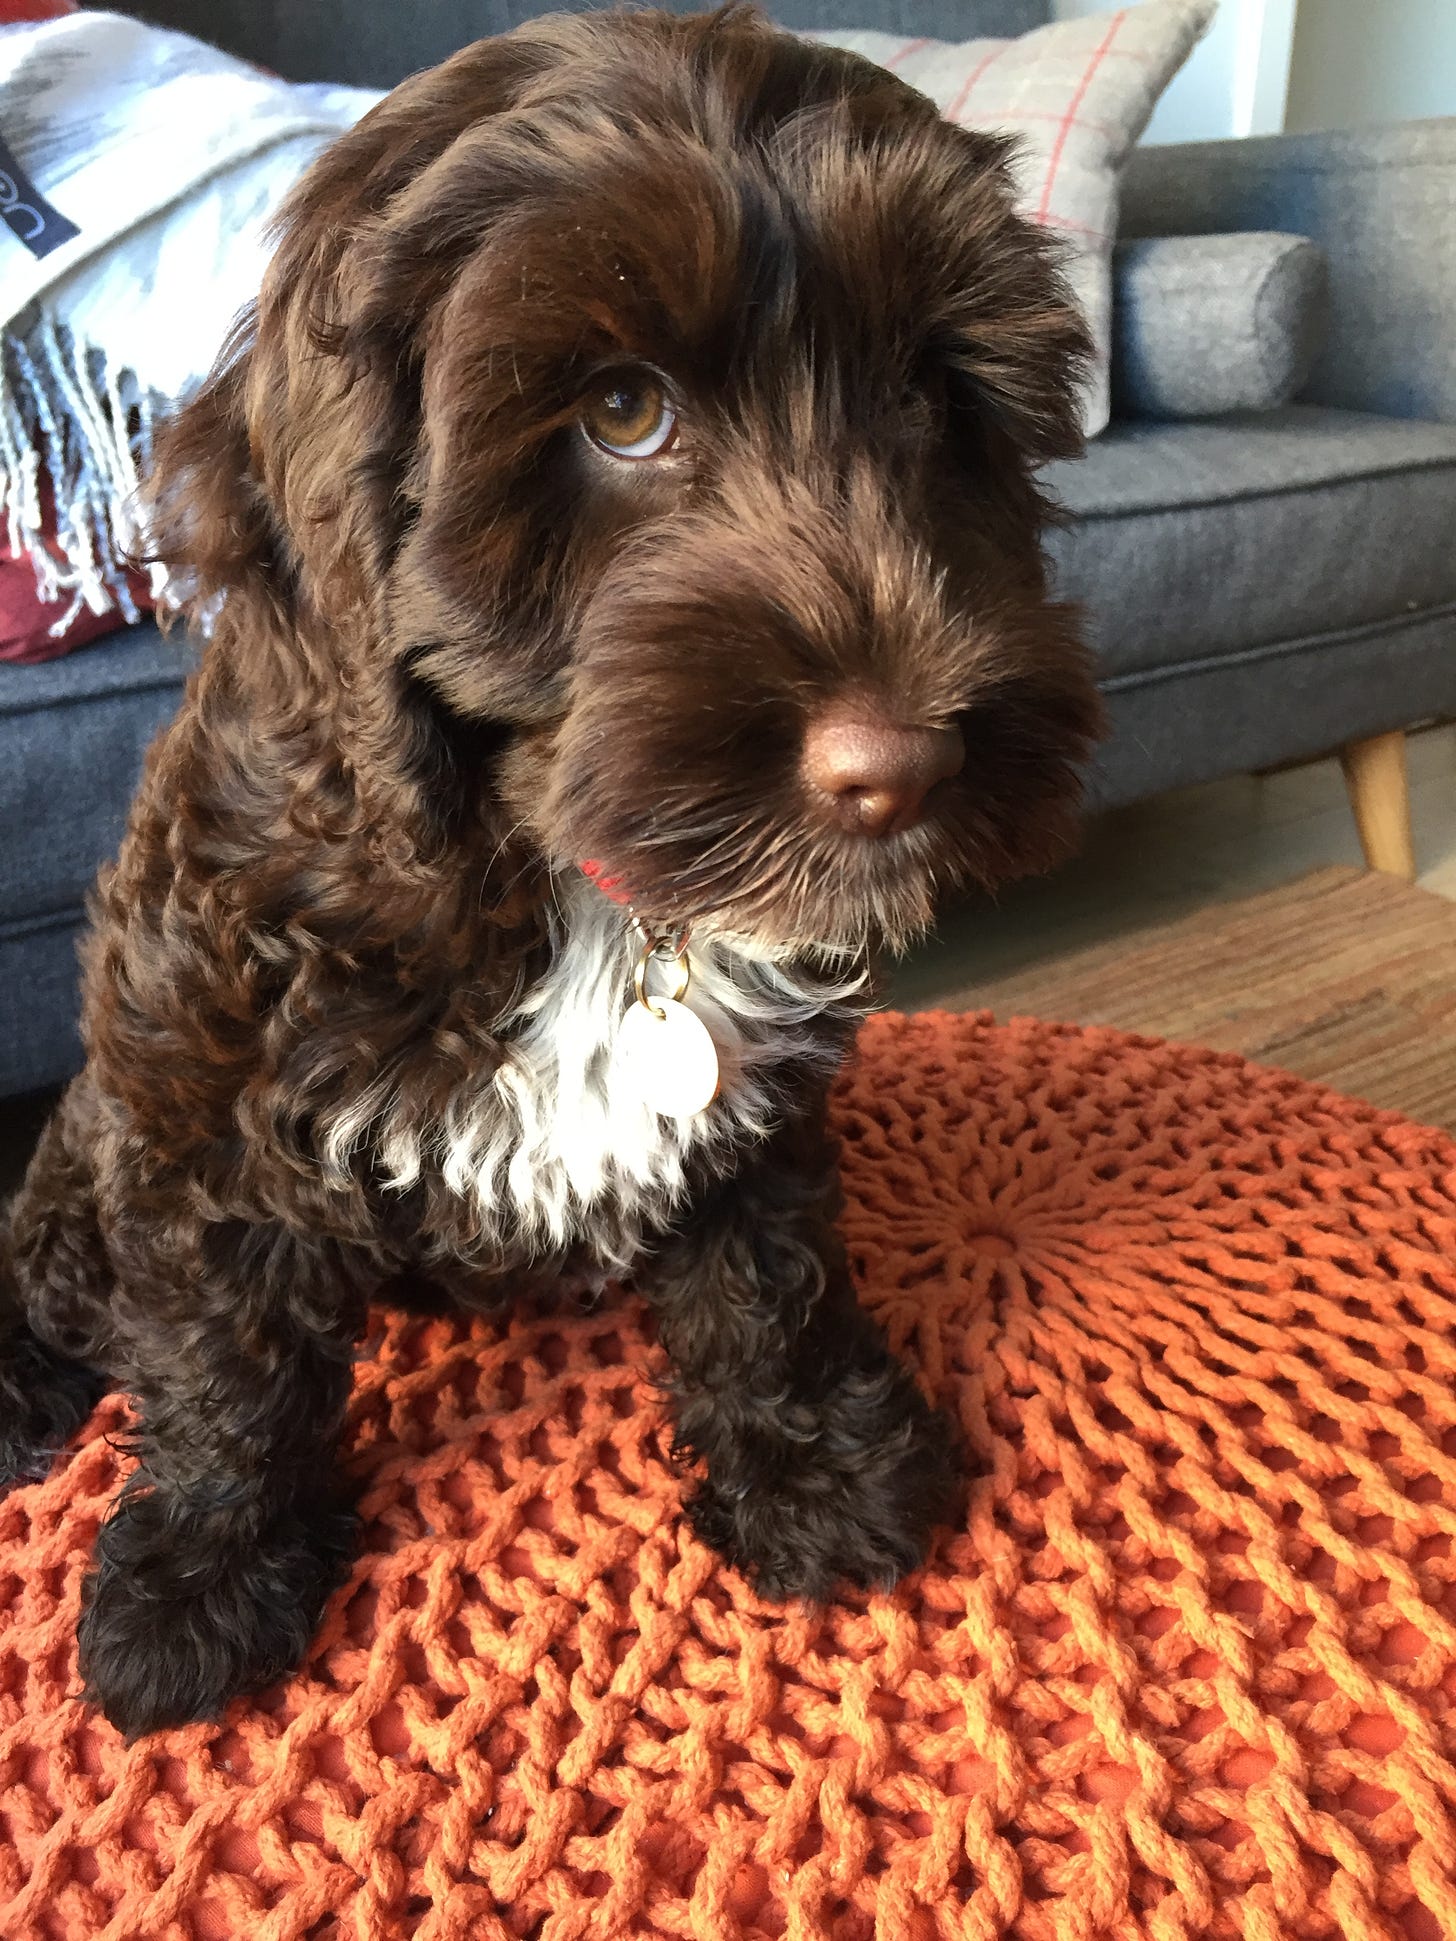 Colour photo of Woofy, a brown cockapoo with white fur on her chest, looking cheekily at the camera